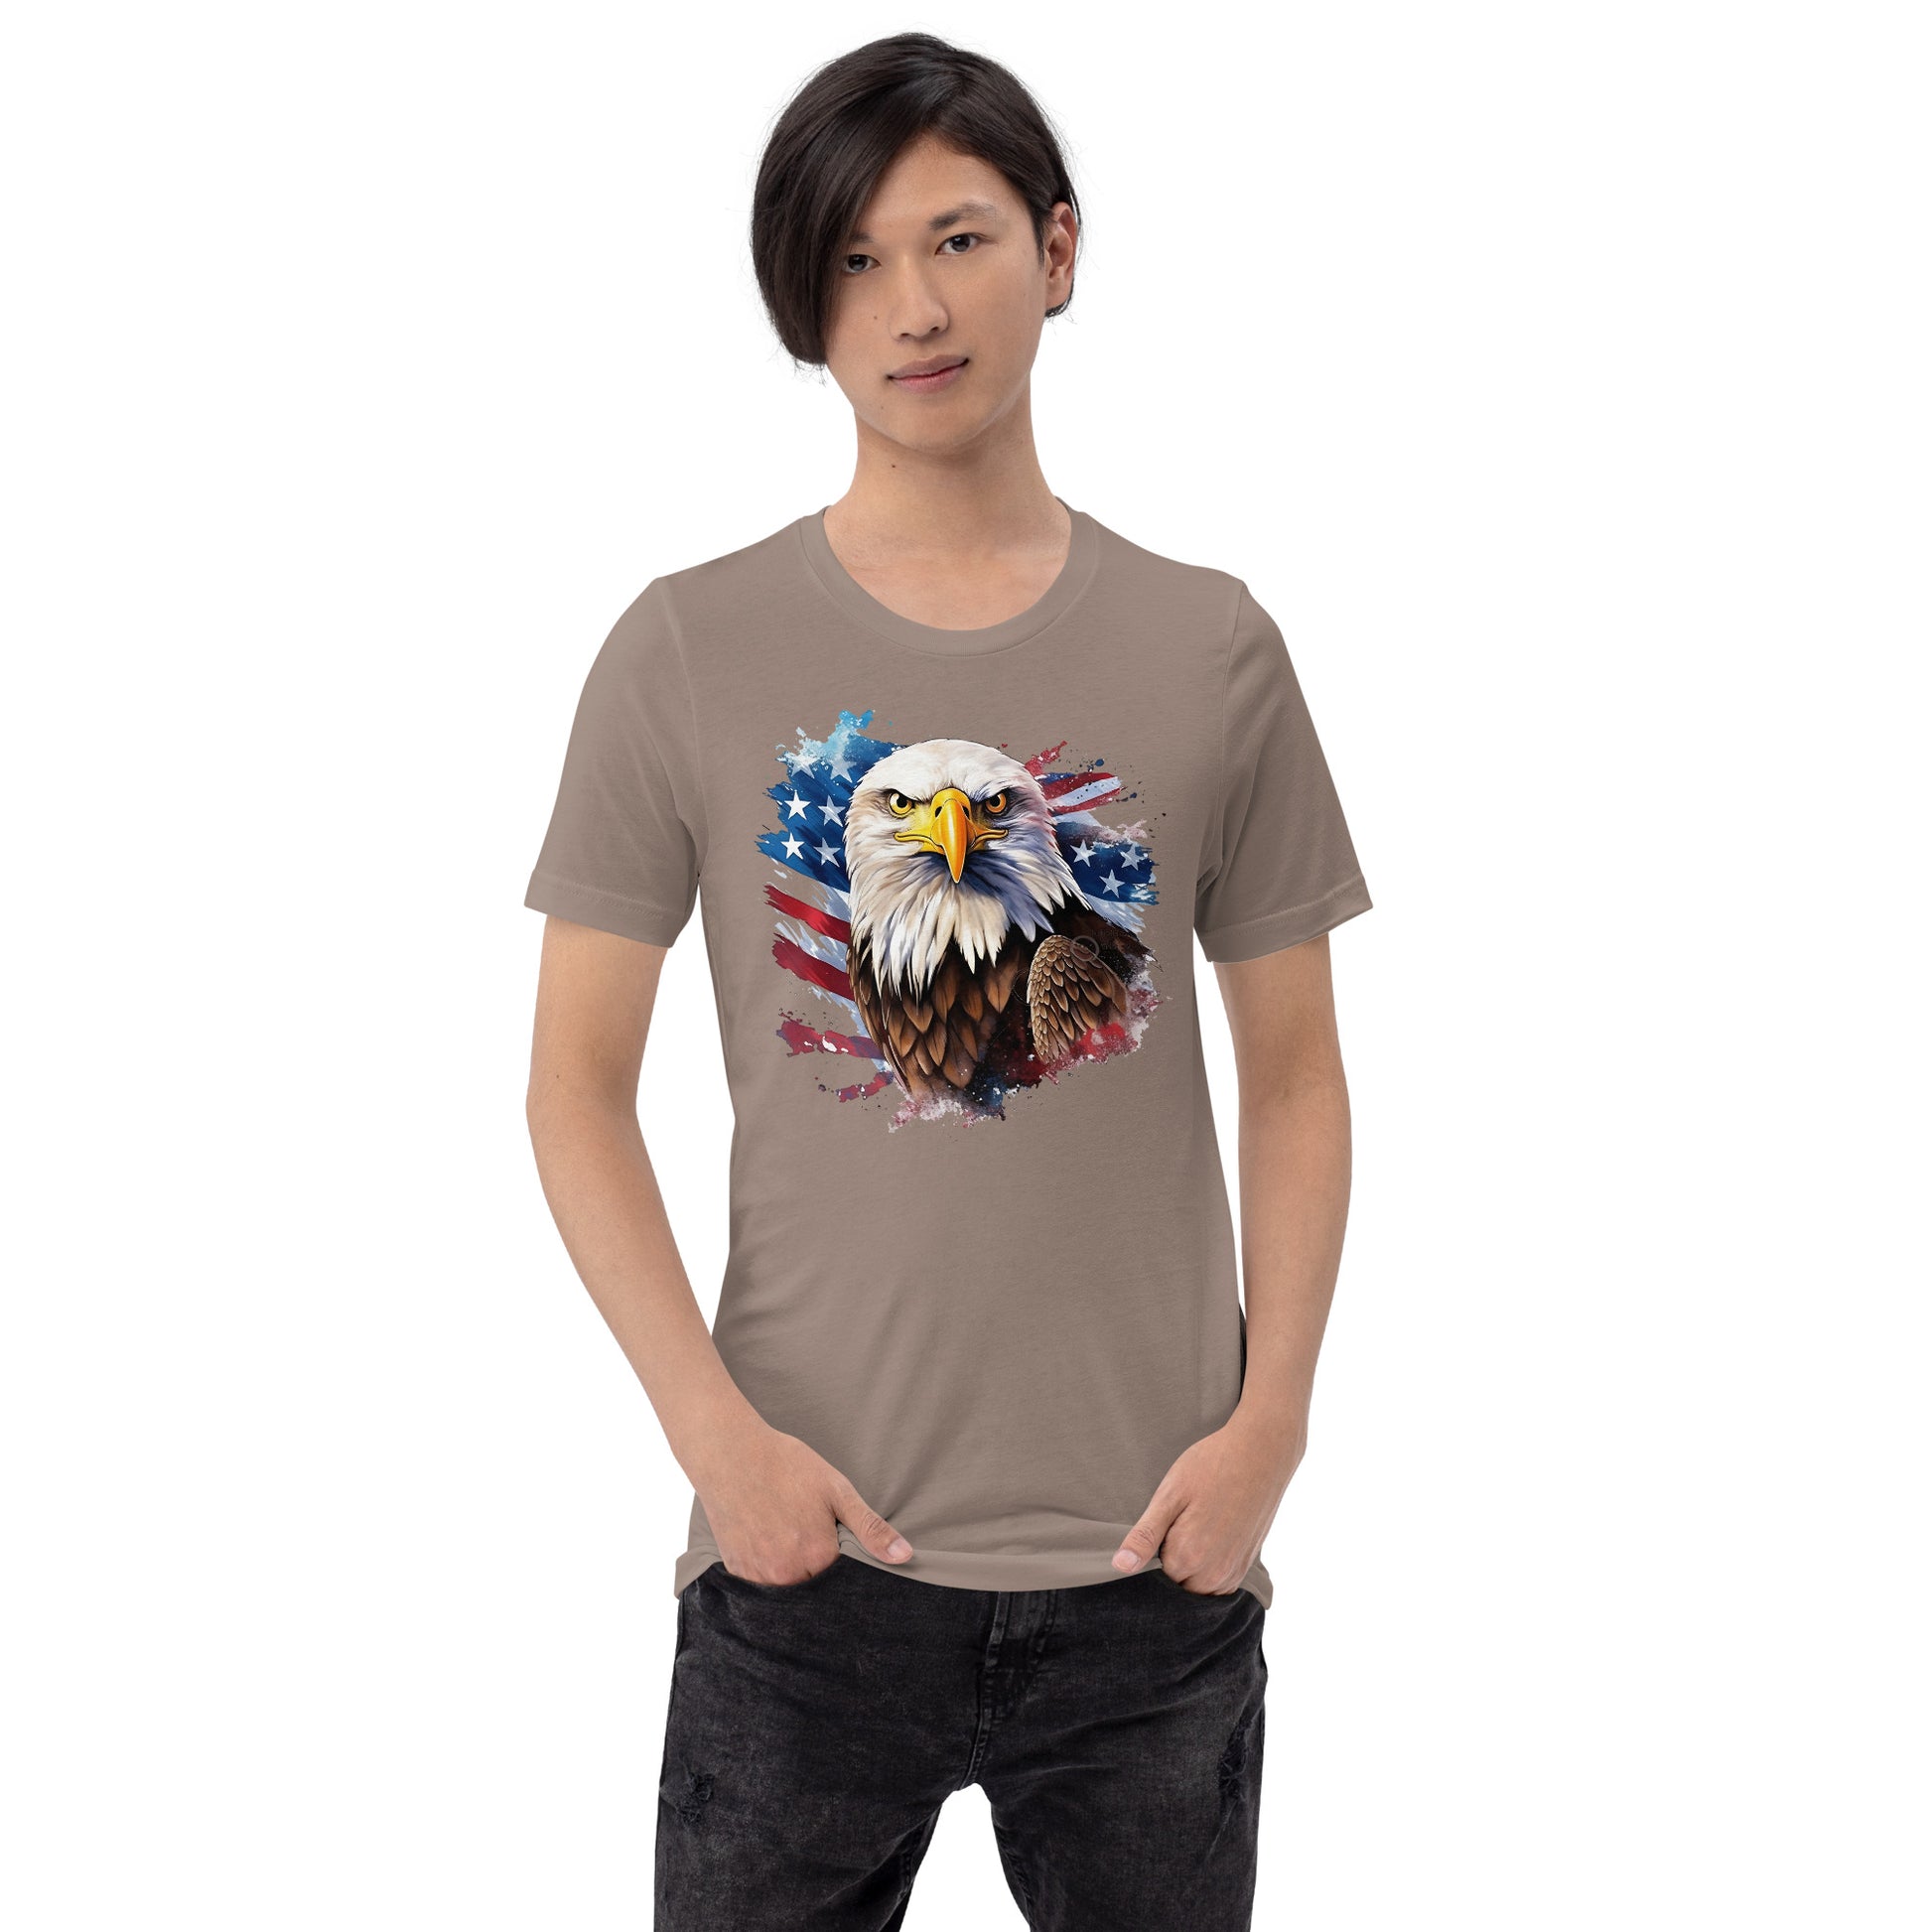 Boy With Patriotic American Eagle T-shirt